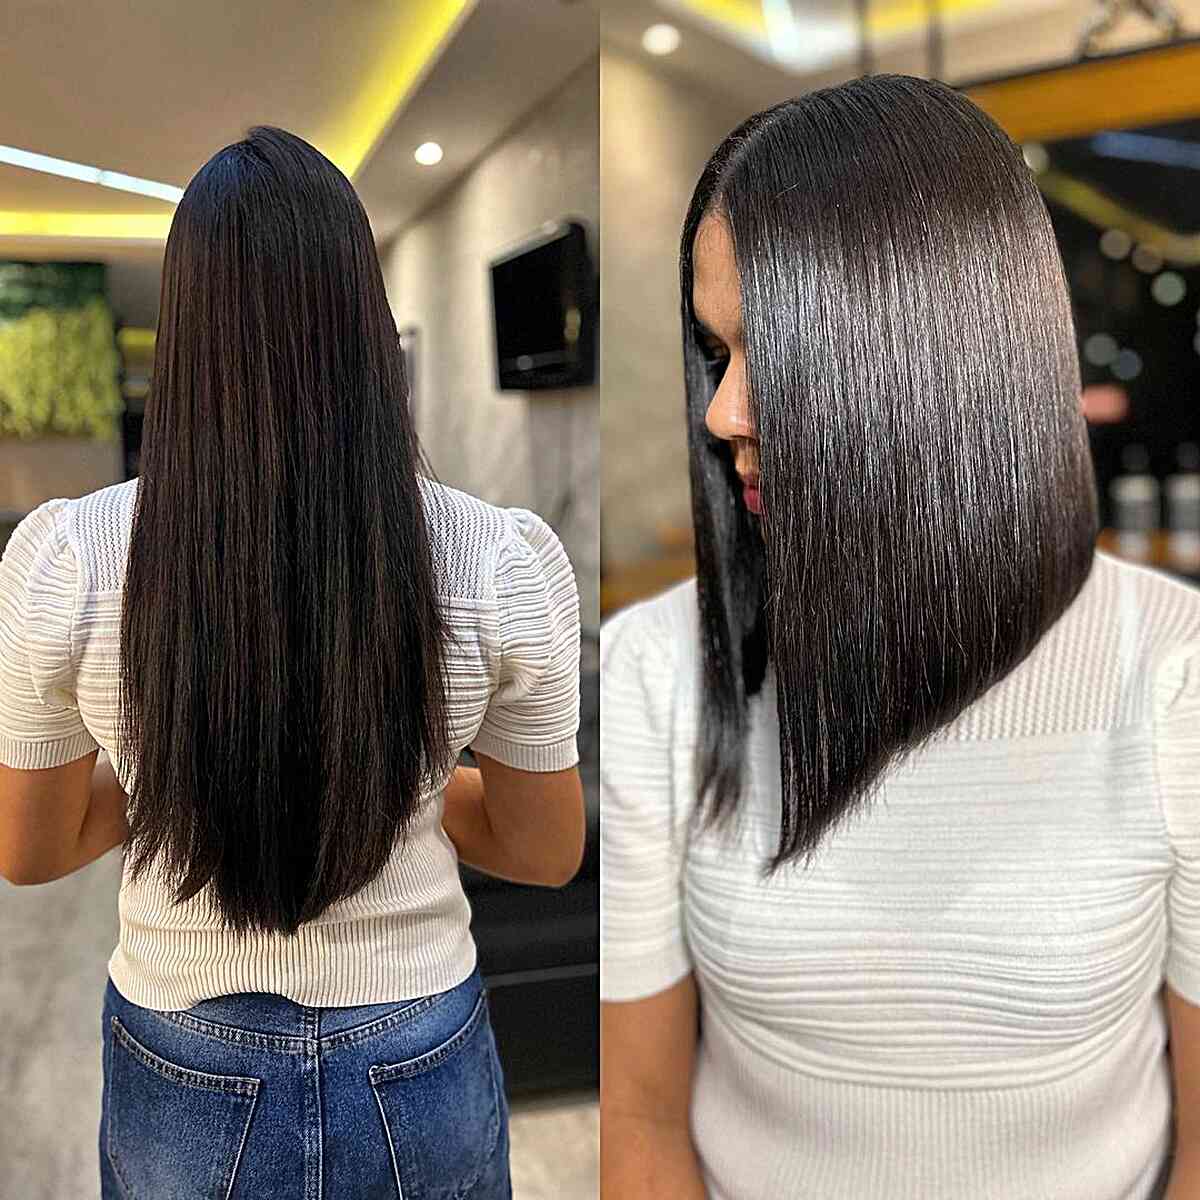 Mid-Length Inverted Bob Cut with no layers and a middle part